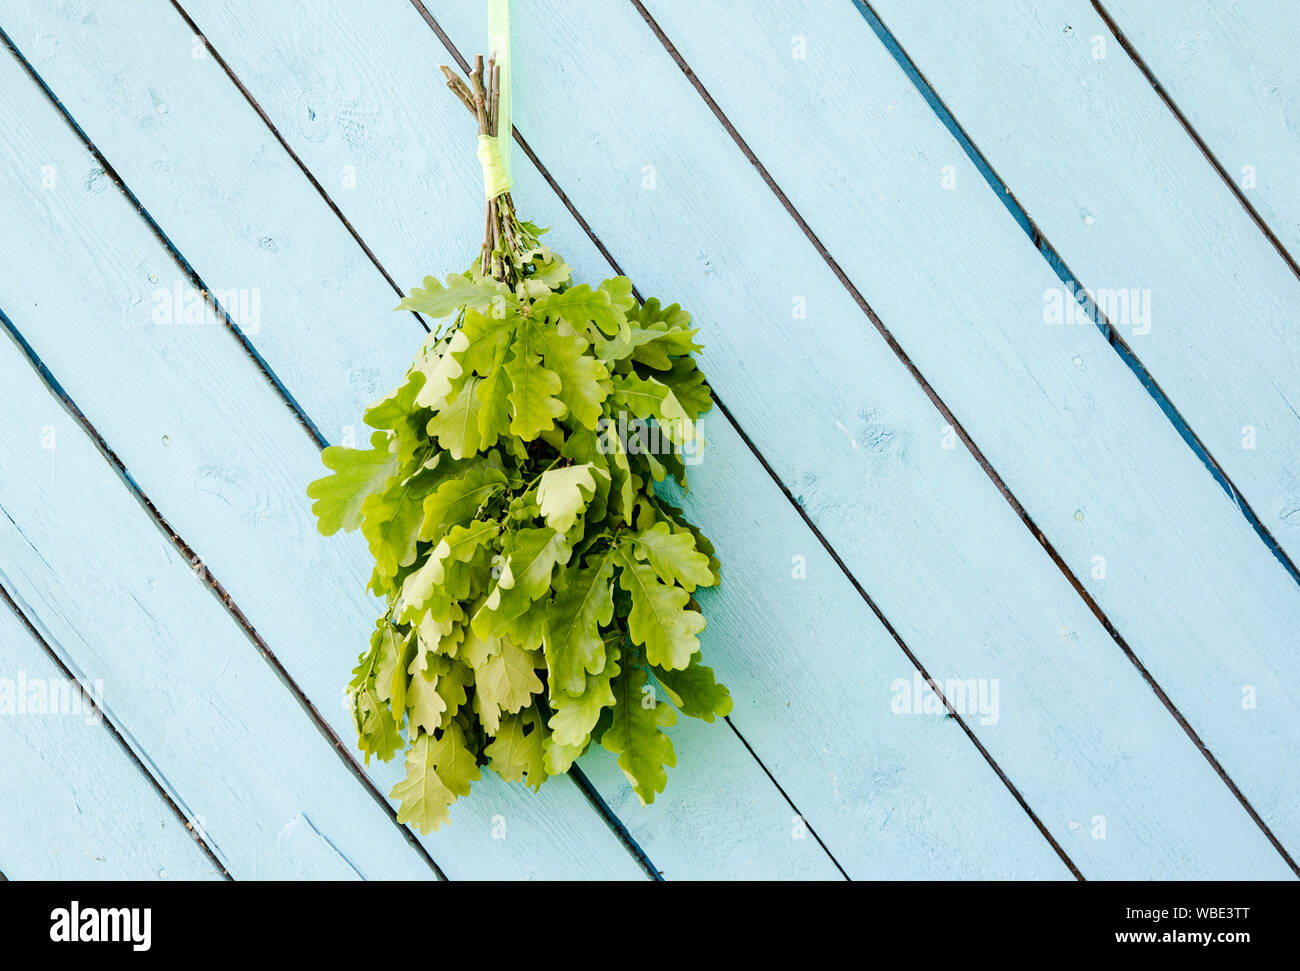 Oak tree sauna whisk broom ( also known as vasta, vihta or venik) hanging and drying on the wall, blue wooden background, copy space. Whisk is used in Stock Photo